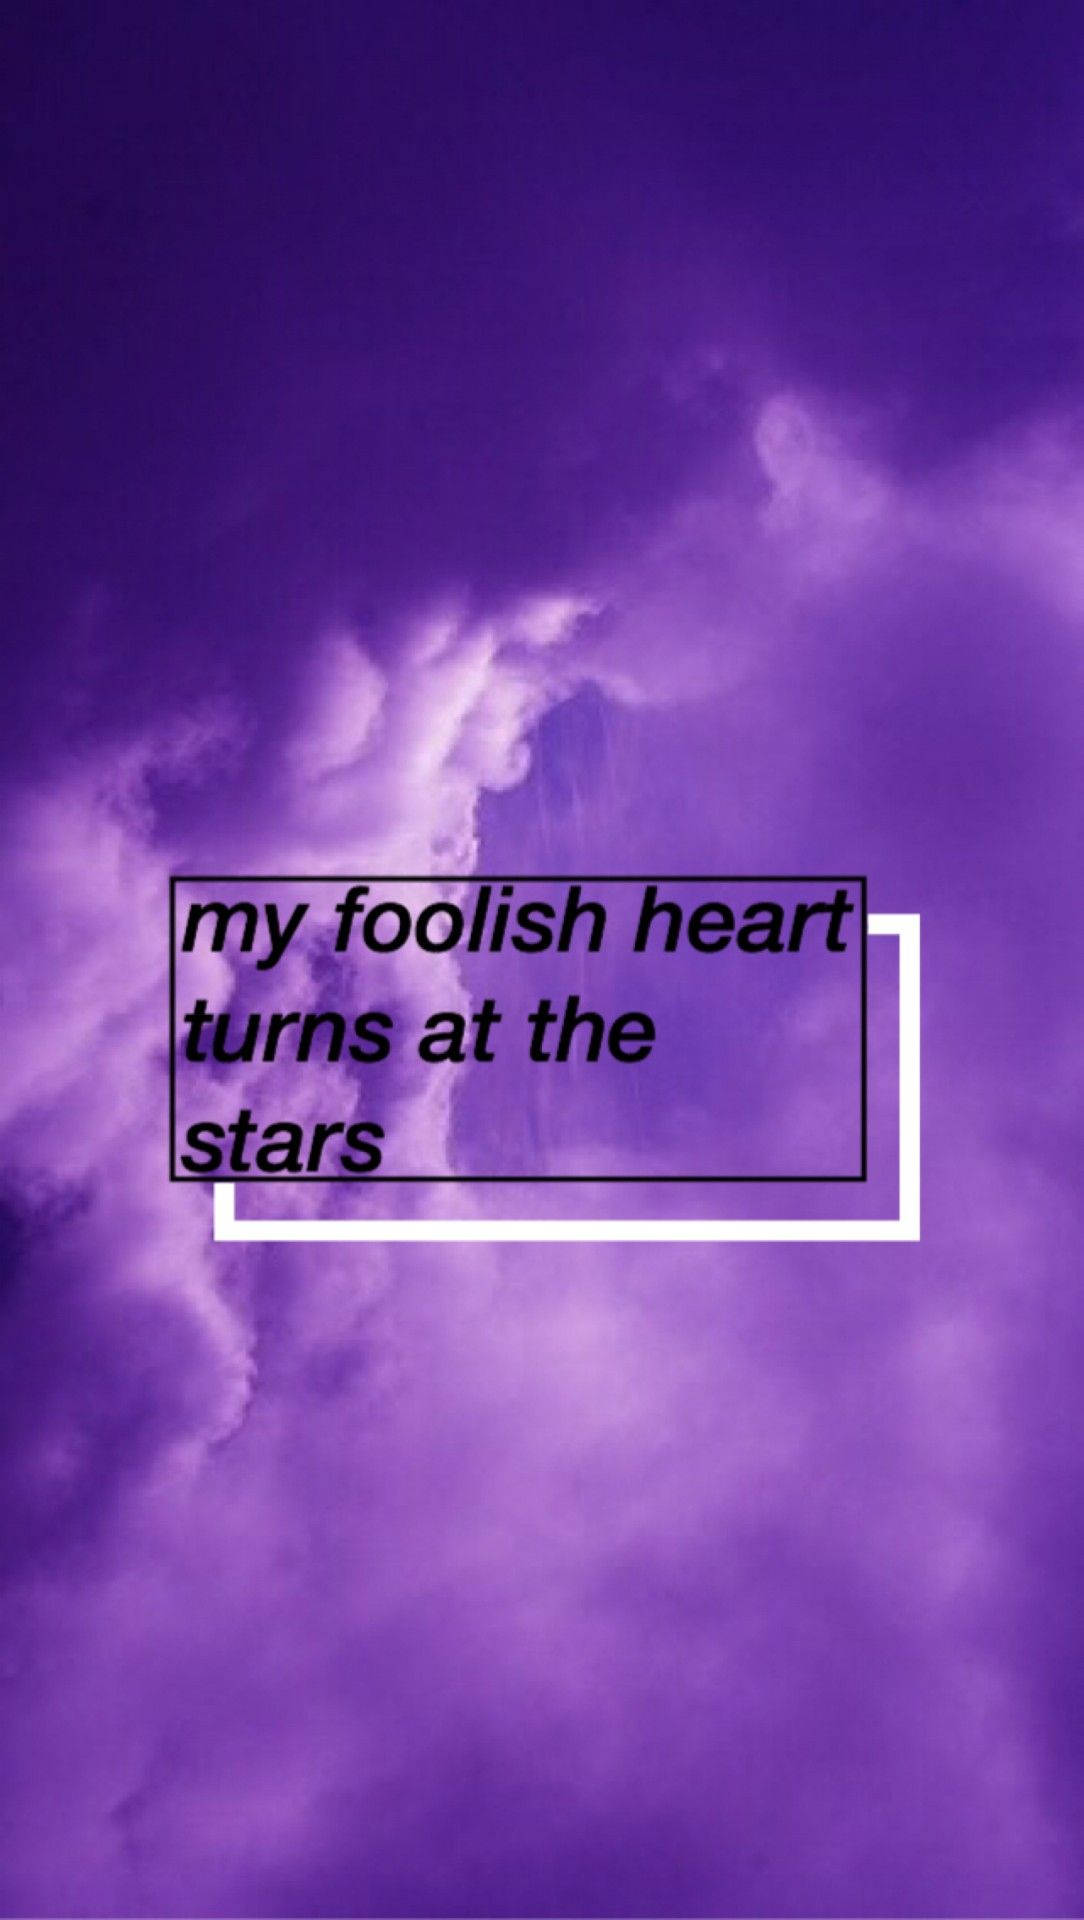 Purple Aesthetic Quote On Clouds Wallpaper